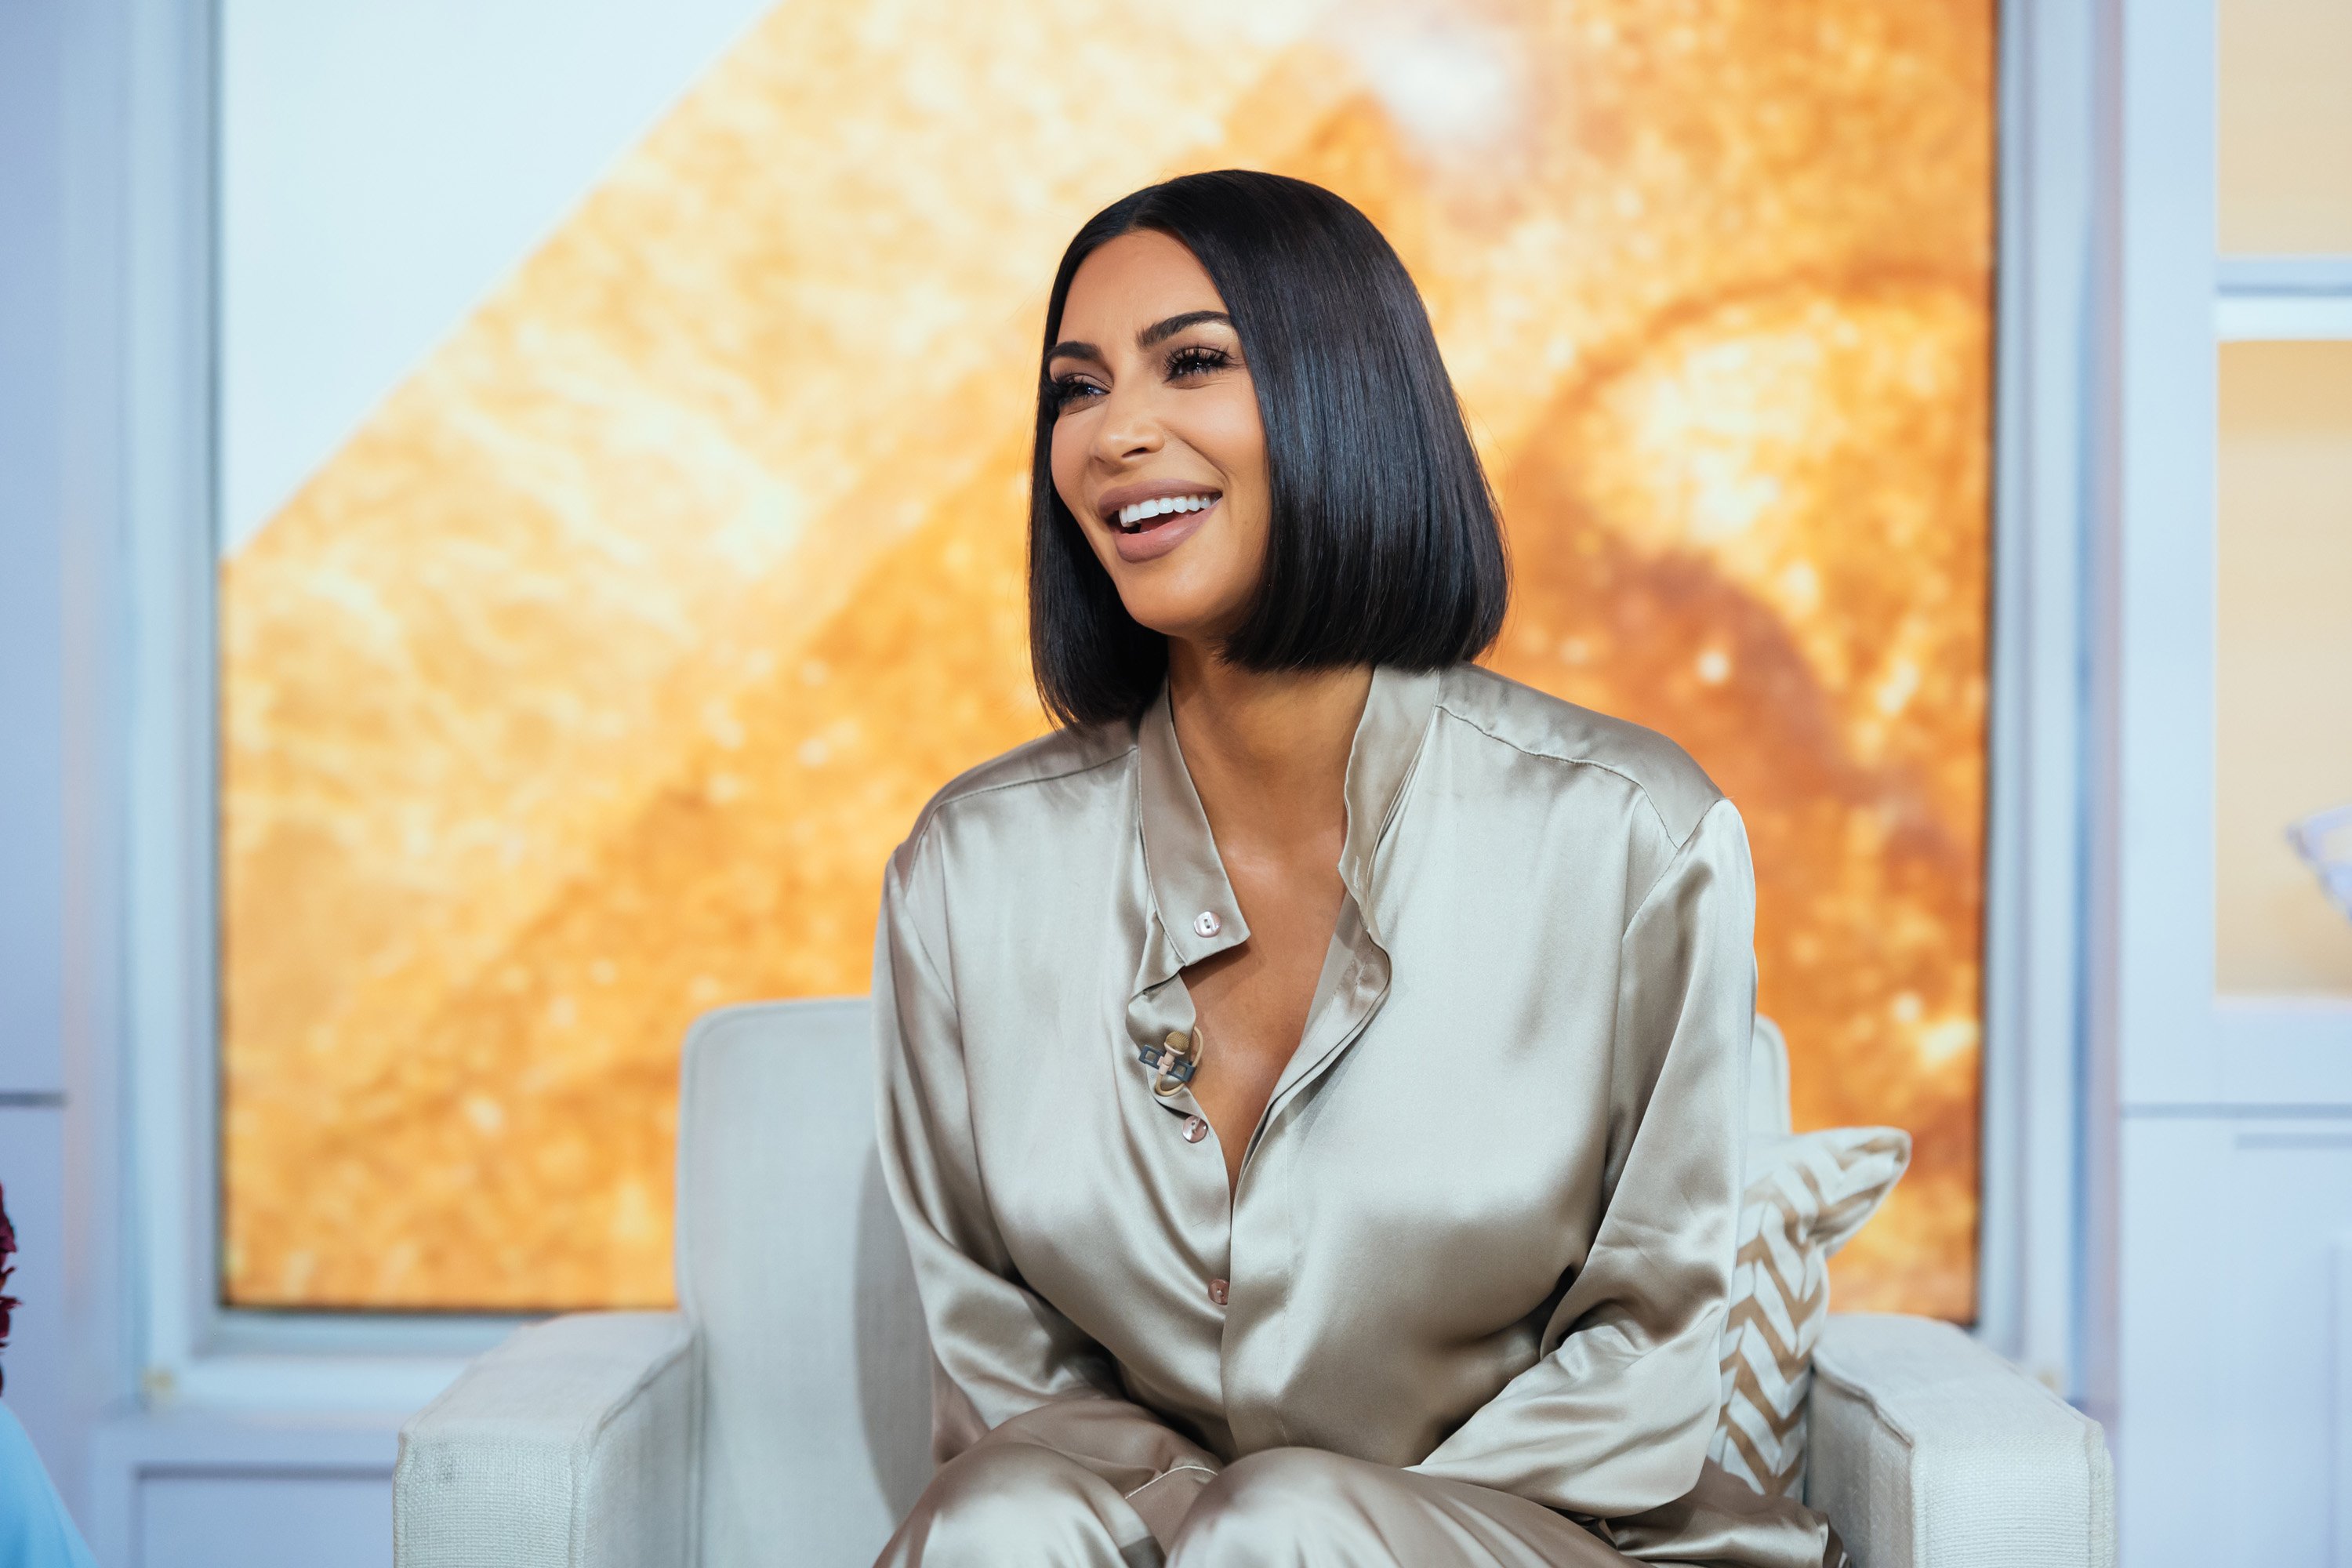 Kim Kardashian West on the Today Show on September 10, 2019 | Photo: Getty Images